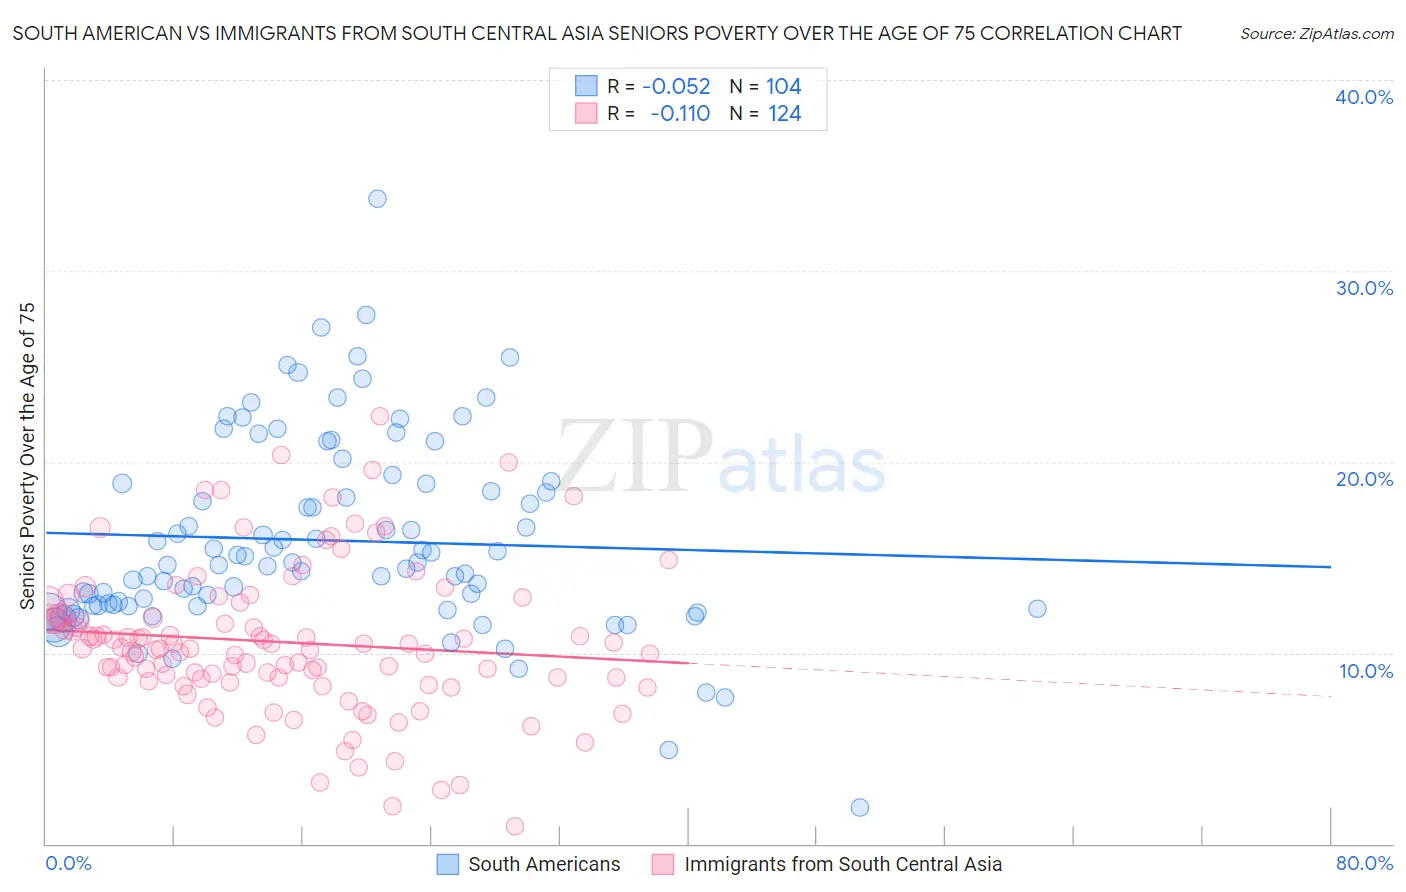 South American vs Immigrants from South Central Asia Seniors Poverty Over the Age of 75